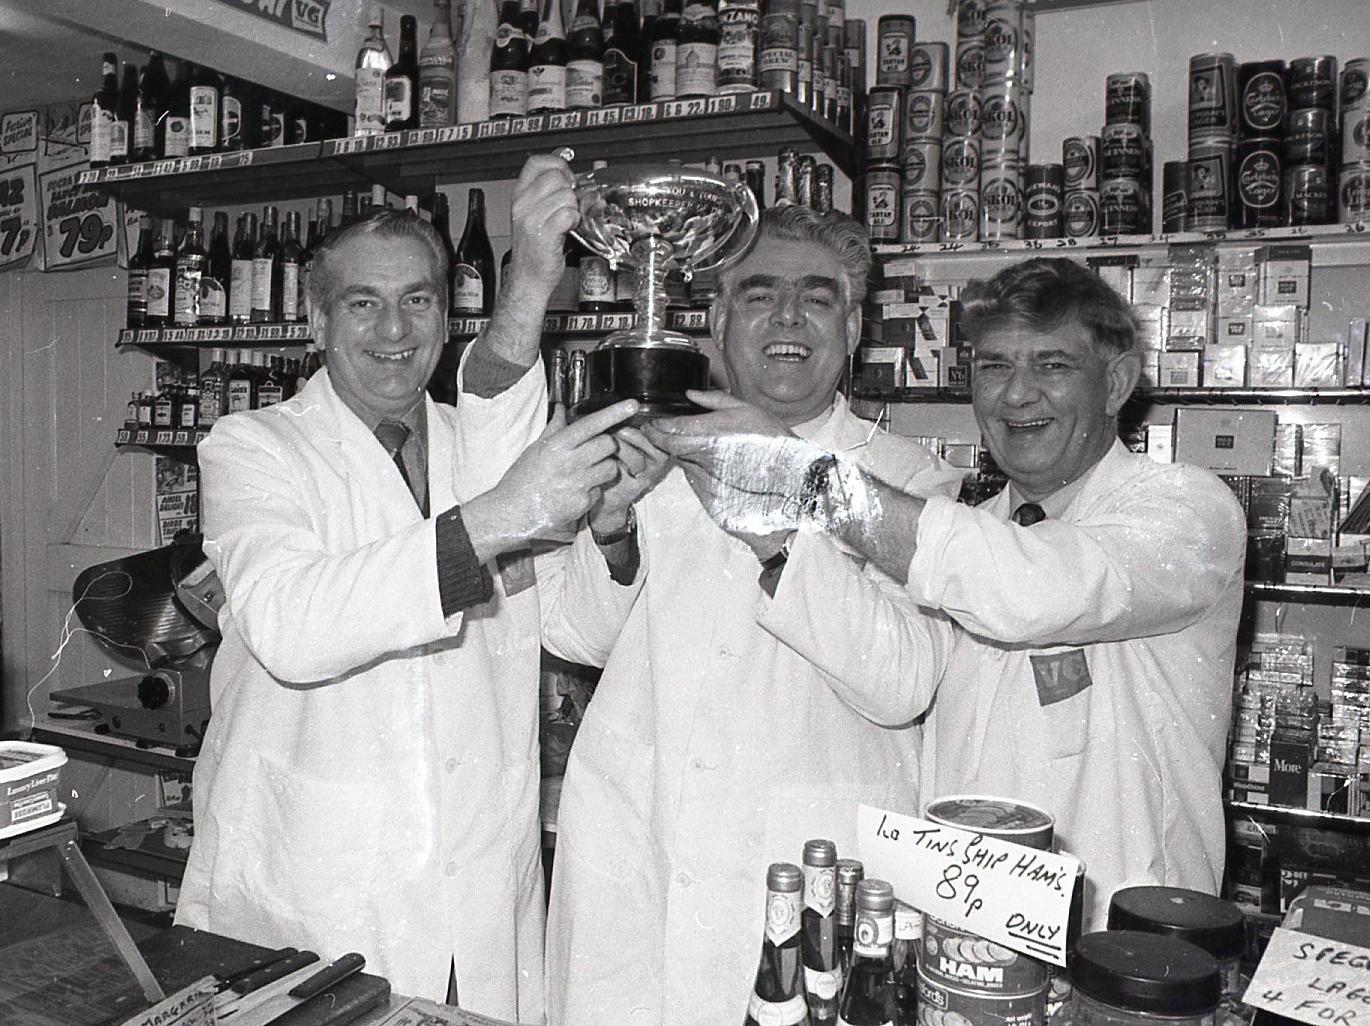 We are the champions... grocers (from left) Adrian, George and Bill Dobson. These three Fylde brothers line up in the village store which won them the BBC's new "Shopkeeper of the Year" title. Tucked away in picturesque Wrea Green, Dobson's boasts the best grocers in England